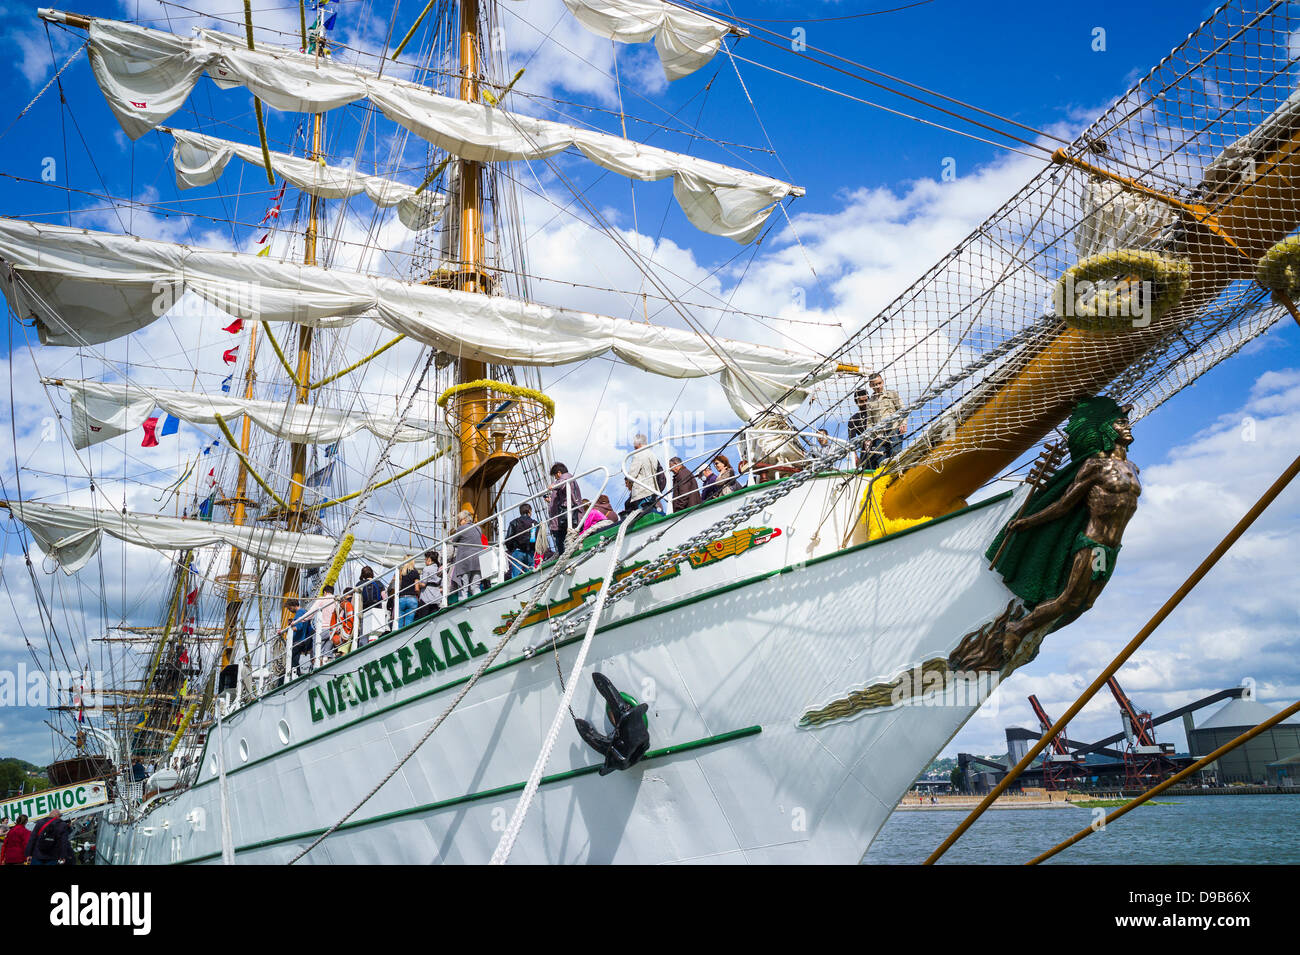 Rouen, France. 15th June 2013. Mexican Naval training ship, Cuauhtemoc at the Rouen Armada. Vivid blue sky with clouds. Horizontal format. Dramatic view of mast and sails. Stock Photo